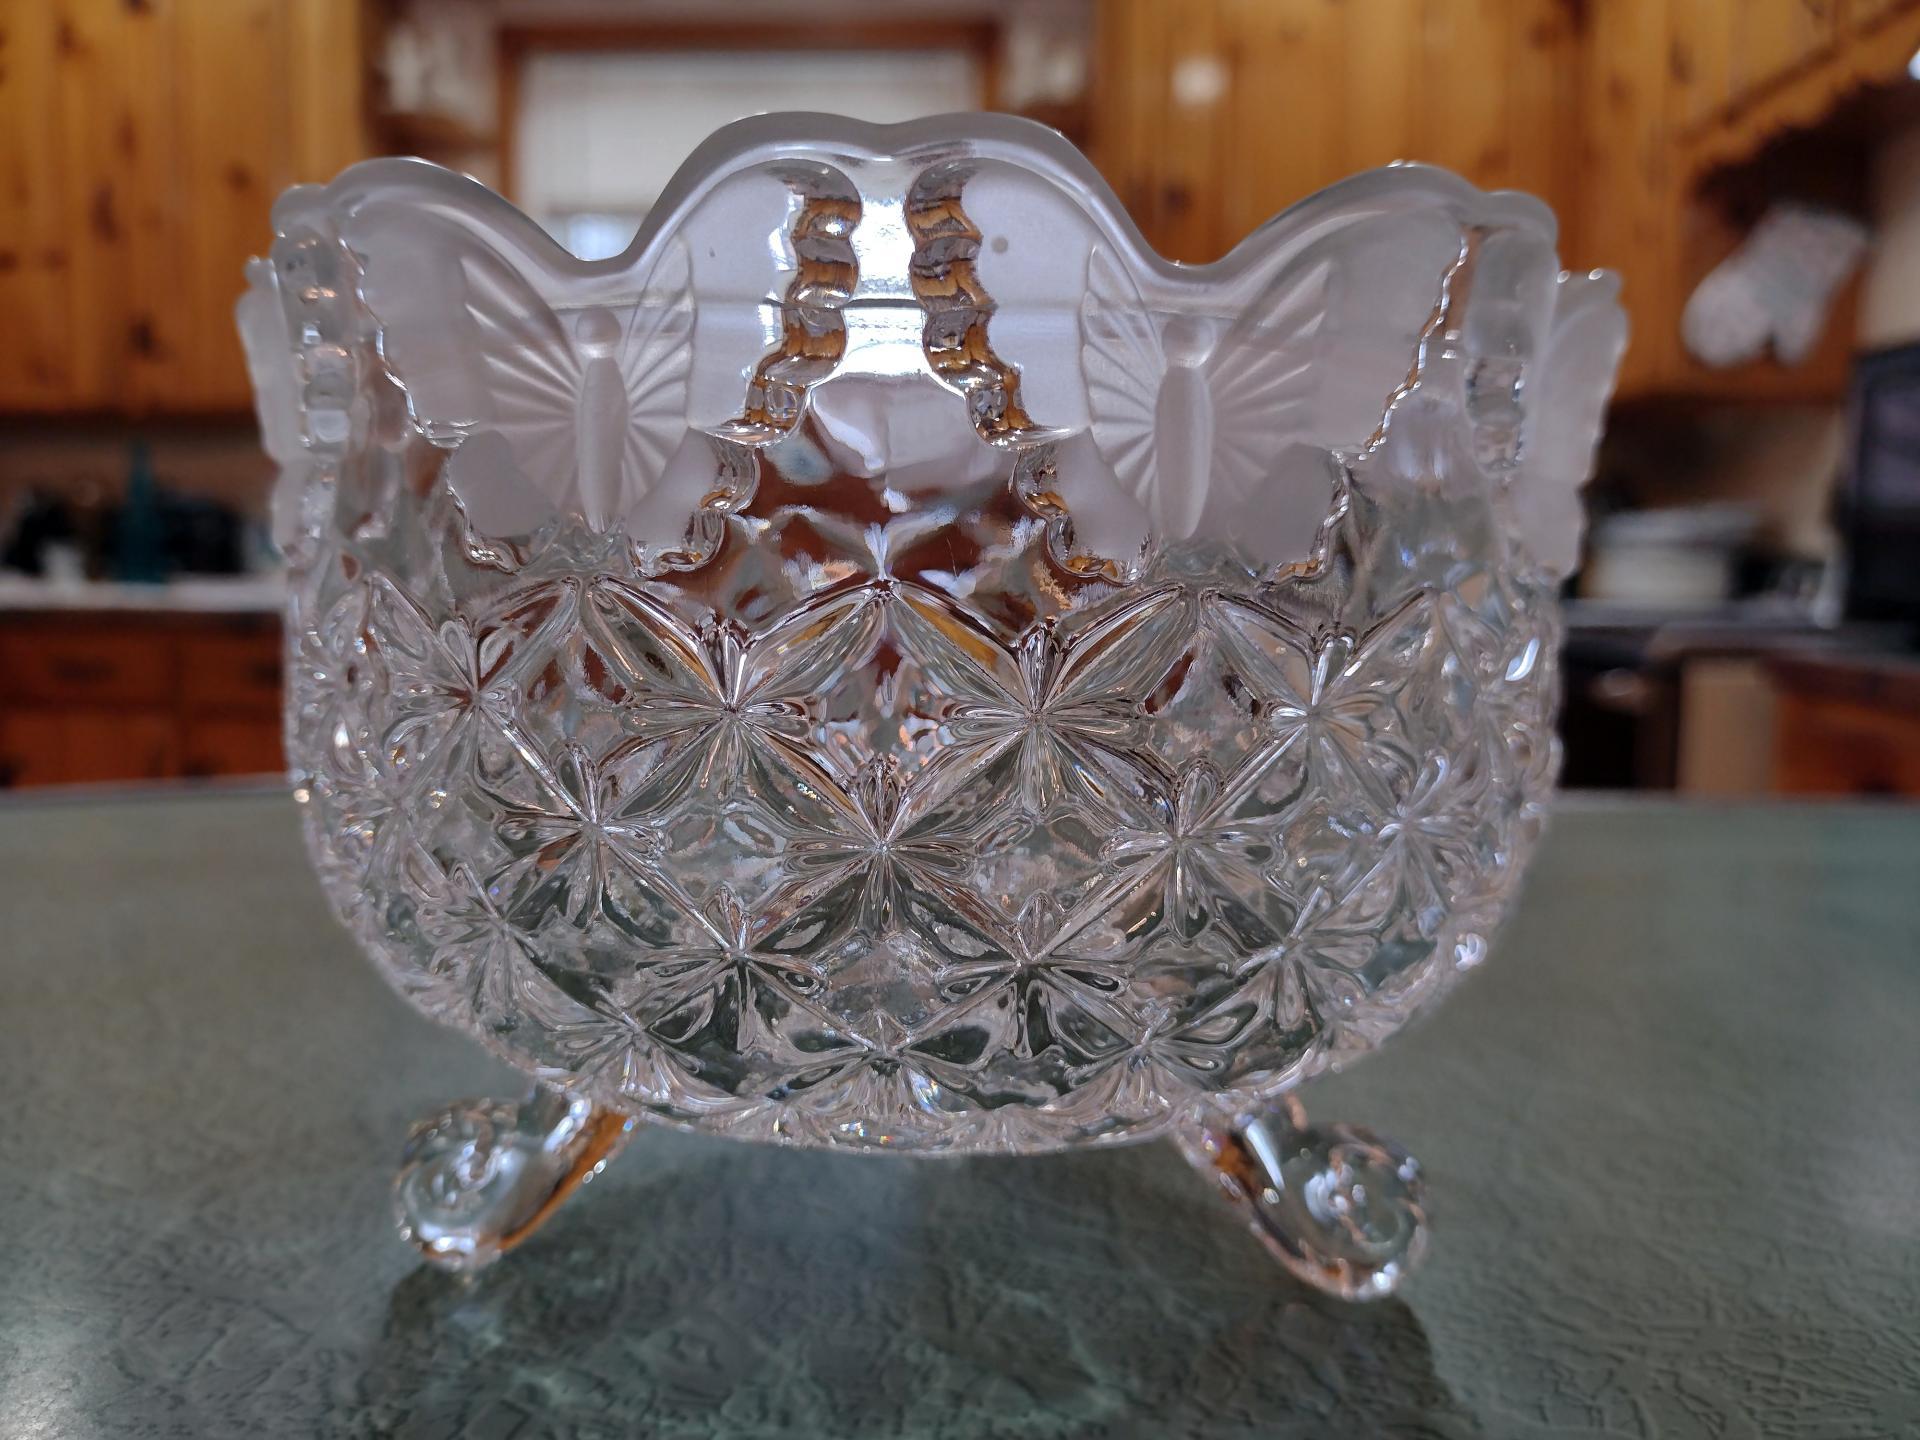 Vintage Hofbauer 1985 German Lead Crystal Footed Butterfly Bowl, Glass Berry Compote Bowl